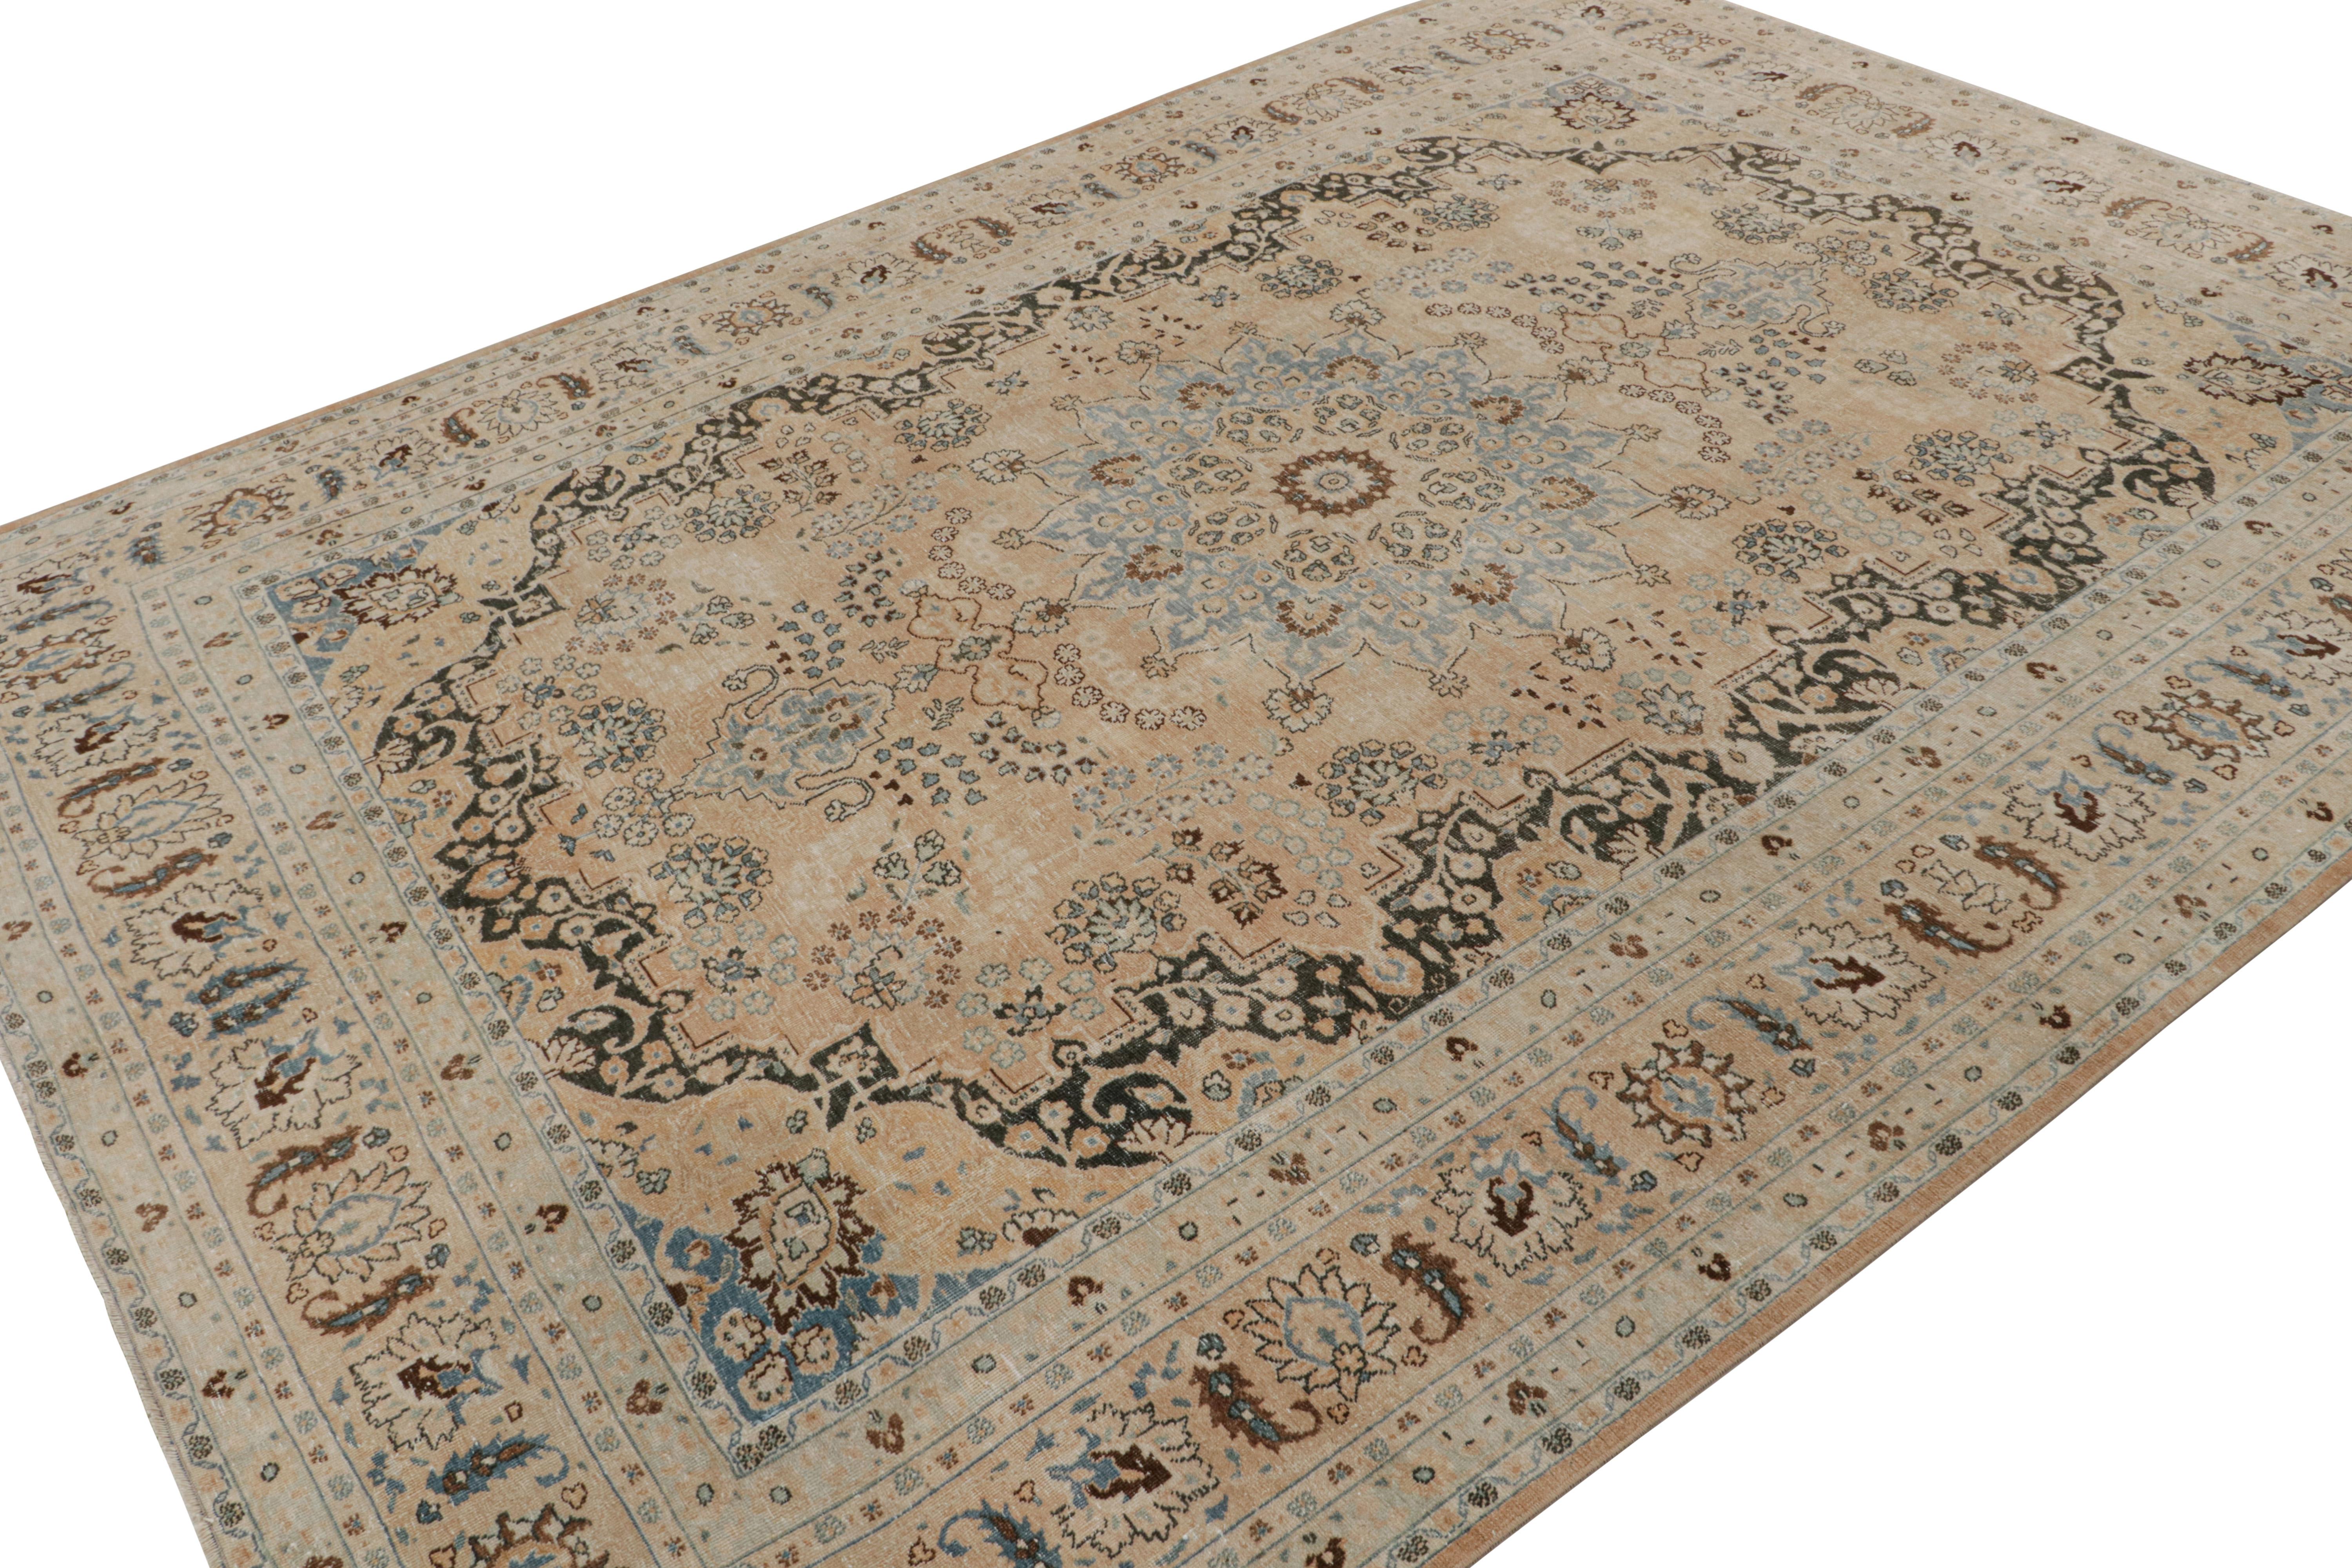 Handwoven in wool, this 8x11 antique Persian Yazd rug originating circa 1920-1930, with intricate rosette medallion and floral patterns, is a masterpiece from one of the most sought-after weaving traditions in Persian city rugs. 

On the design: